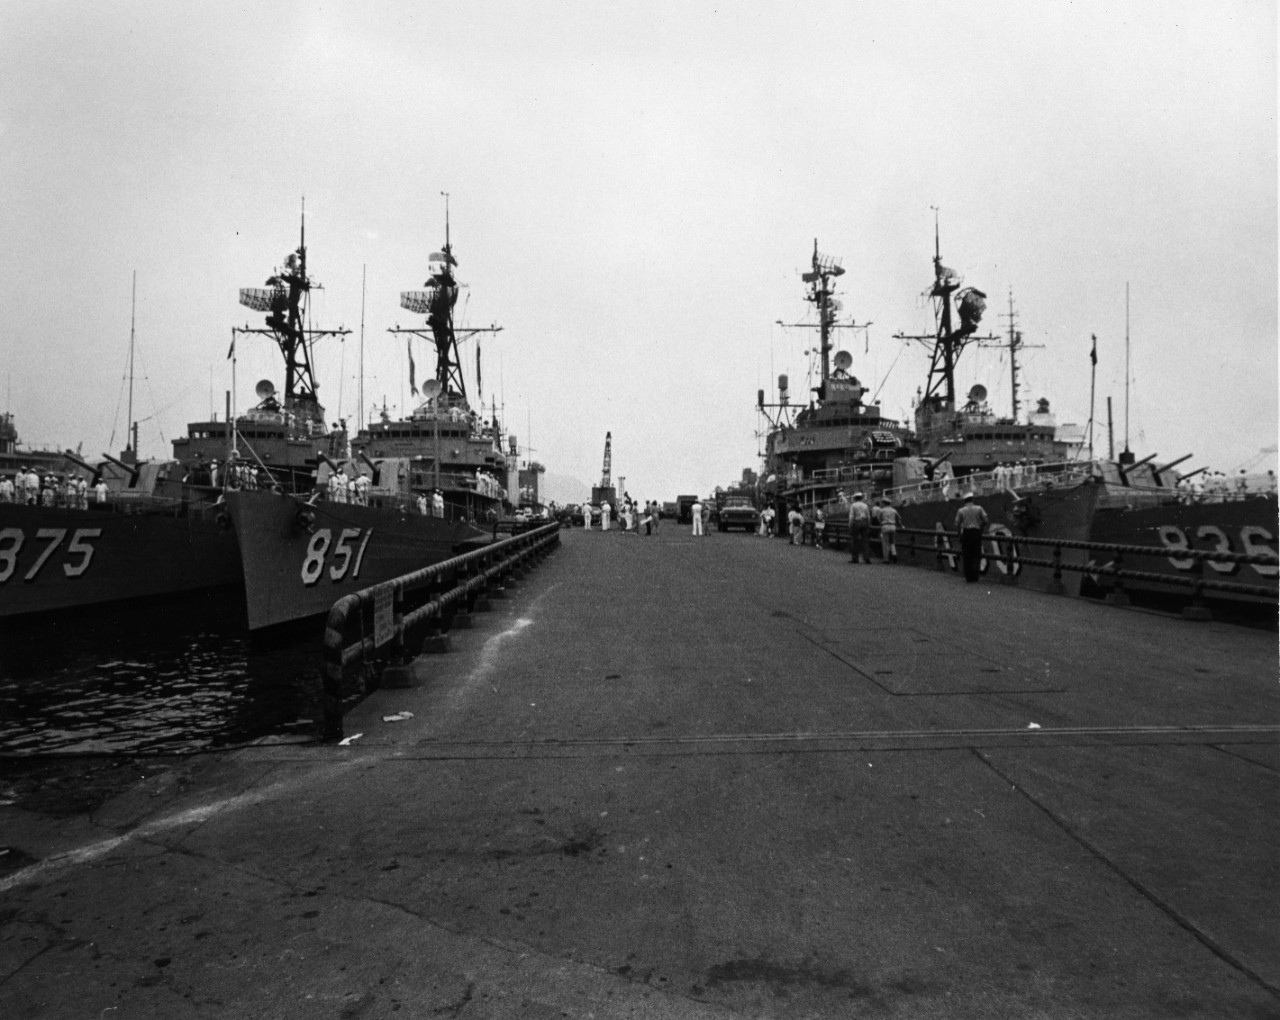 Ships of Destroyer Division 32 tied up at Yokusuka, Japan. Just minutes after this picture was taken the ships were underway for home, concluding more than 18 months off the coast of Vietnam. Seen are USS Henry W. Tucker (DD-875), USS Rupertes (DD-851), and USS George K. MacKenzie (DD-836).